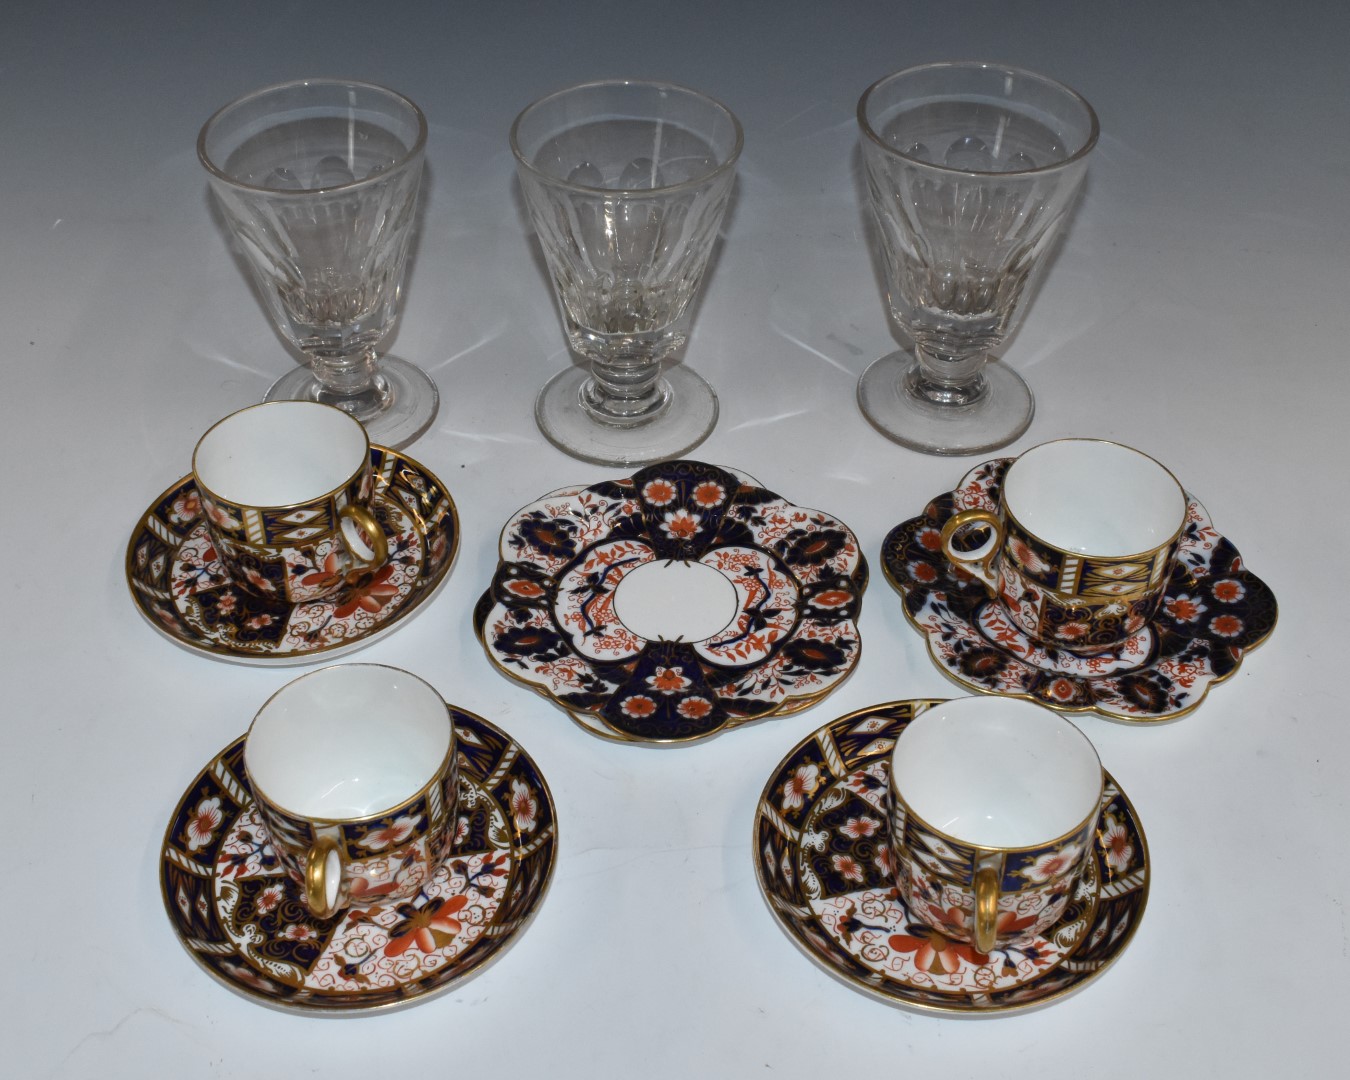 Three Royal Crown Derby Imari cups and saucers plus one extra cup, pattern no 2451, three Foley